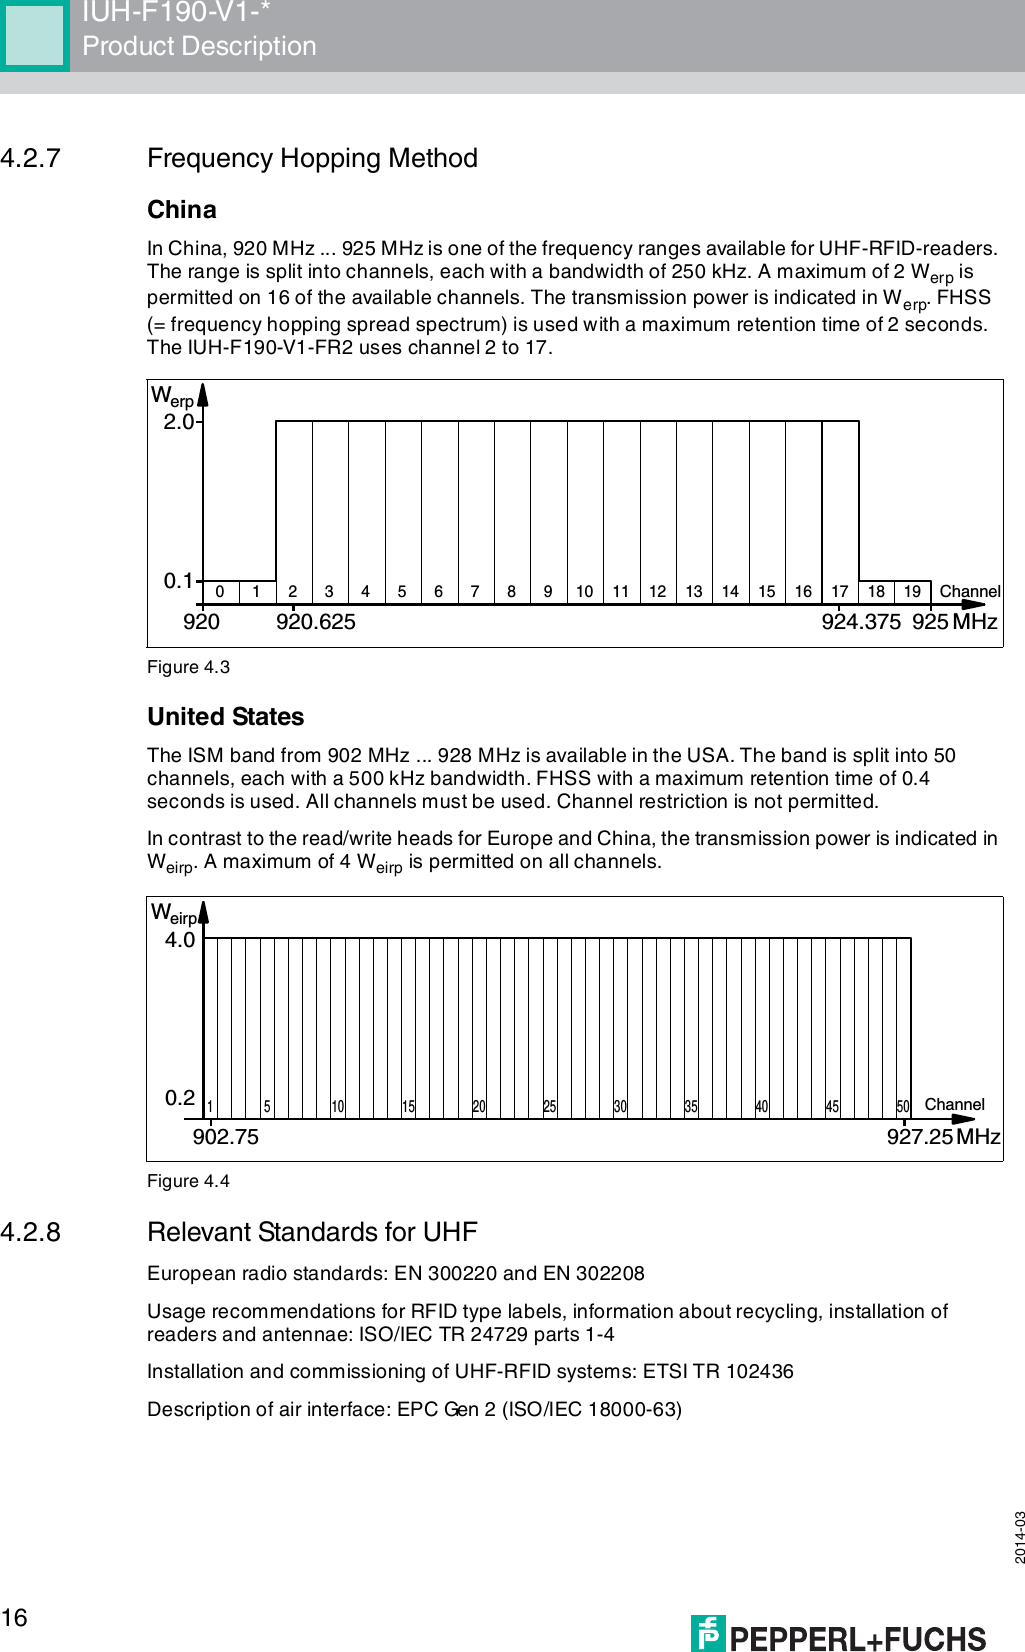  2014-0316IUH-F190-V1-*Product Description4.2.7 Frequency Hopping MethodChinaIn China, 920 MHz ... 925 MHz is one of the frequency ranges available for UHF-RFID-readers. The range is split into channels, each with a bandwidth of 250 kHz. A maximum of 2 Werp is permitted on 16 of the available channels. The transmission power is indicated in Werp. FHSS (= frequency hopping spread spectrum) is used with a maximum retention time of 2 seconds. The IUH-F190-V1-FR2 uses channel 2 to 17.Figure 4.3United StatesThe ISM band from 902 MHz ... 928 MHz is available in the USA. The band is split into 50 channels, each with a 500 kHz bandwidth. FHSS with a maximum retention time of 0.4 seconds is used. All channels must be used. Channel restriction is not permitted.In contrast to the read/write heads for Europe and China, the transmission power is indicated in Weirp. A maximum of 4 Weirp is permitted on all channels.Figure 4.44.2.8 Relevant Standards for UHFEuropean radio standards: EN 300220 and EN 302208Usage recommendations for RFID type labels, information about recycling, installation of readers and antennae: ISO/IEC TR 24729 parts 1-4Installation and commissioning of UHF-RFID systems: ETSI TR 102436Description of air interface: EPC Gen 2 (ISO/IEC 18000-63)Channel0.12.0920 925920.625 924.375 MHzWerp0123456789101112131415161718190.24.0902.75 927.25MHzChannelWeirp10 15 2051 30354025 45 50